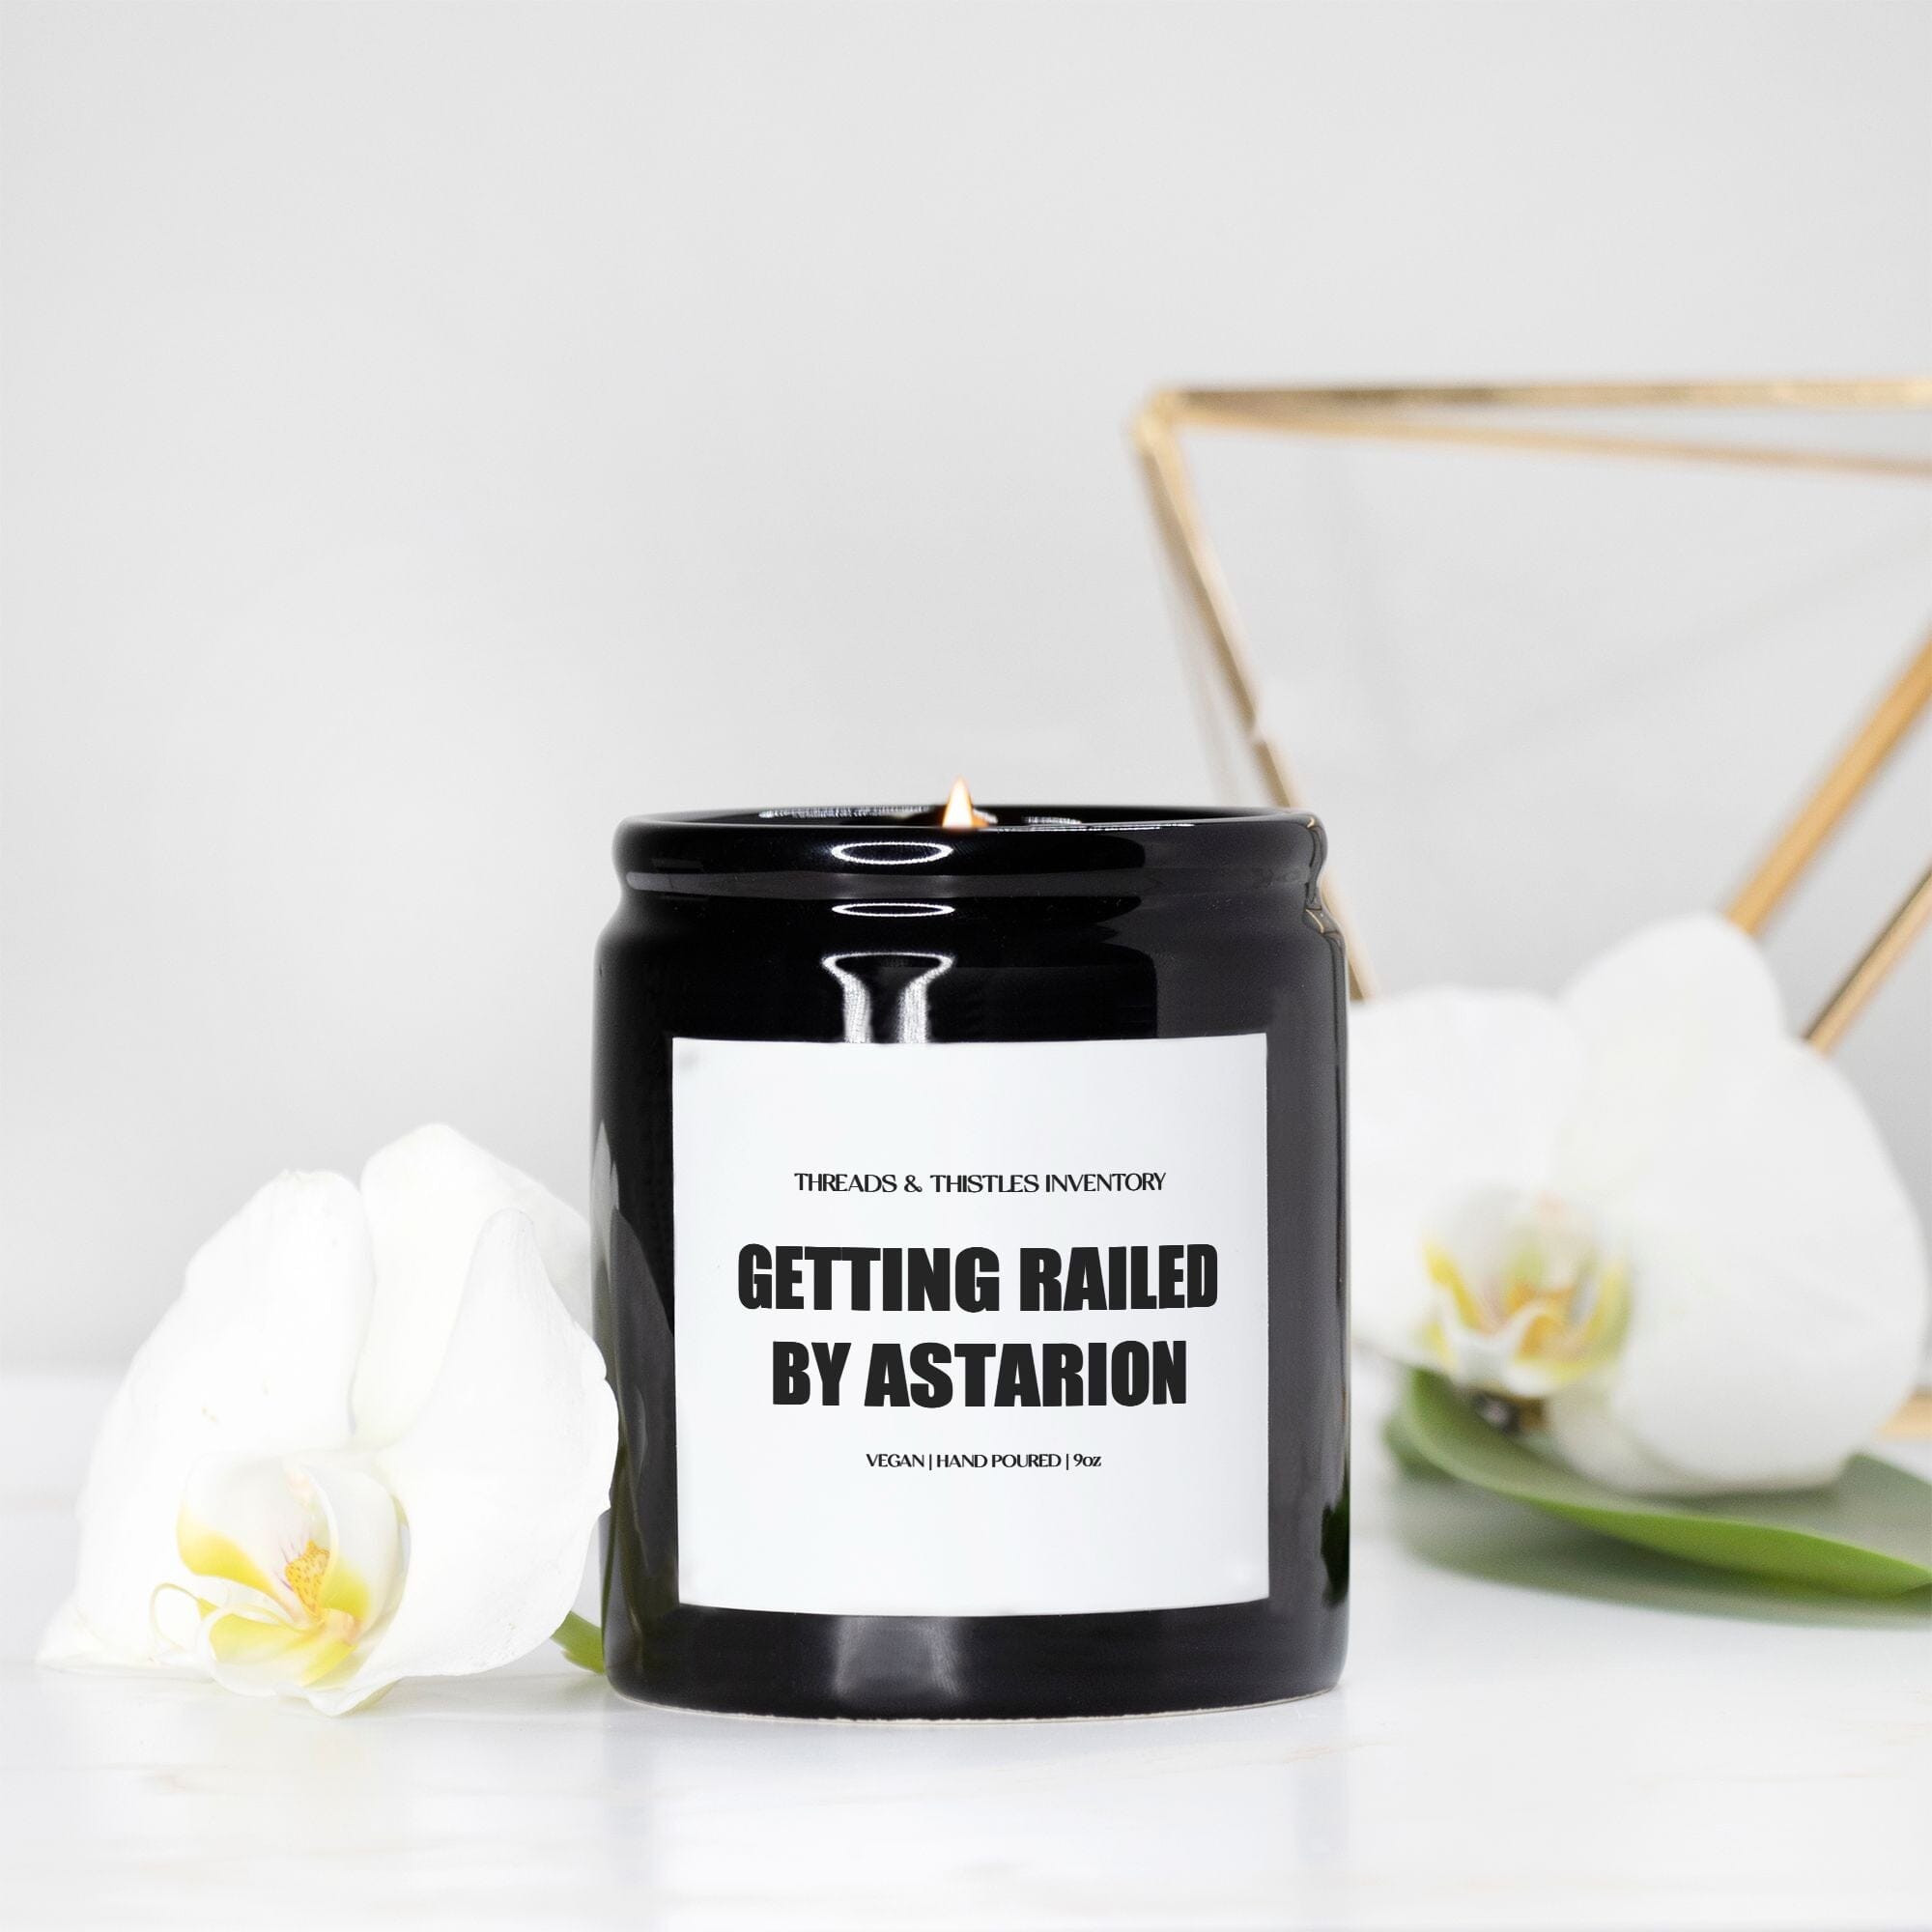 Getting Railed by Astarion | Candle Ceramic 8oz | Baldur's Gate Candles Threads & Thistles Inventory 